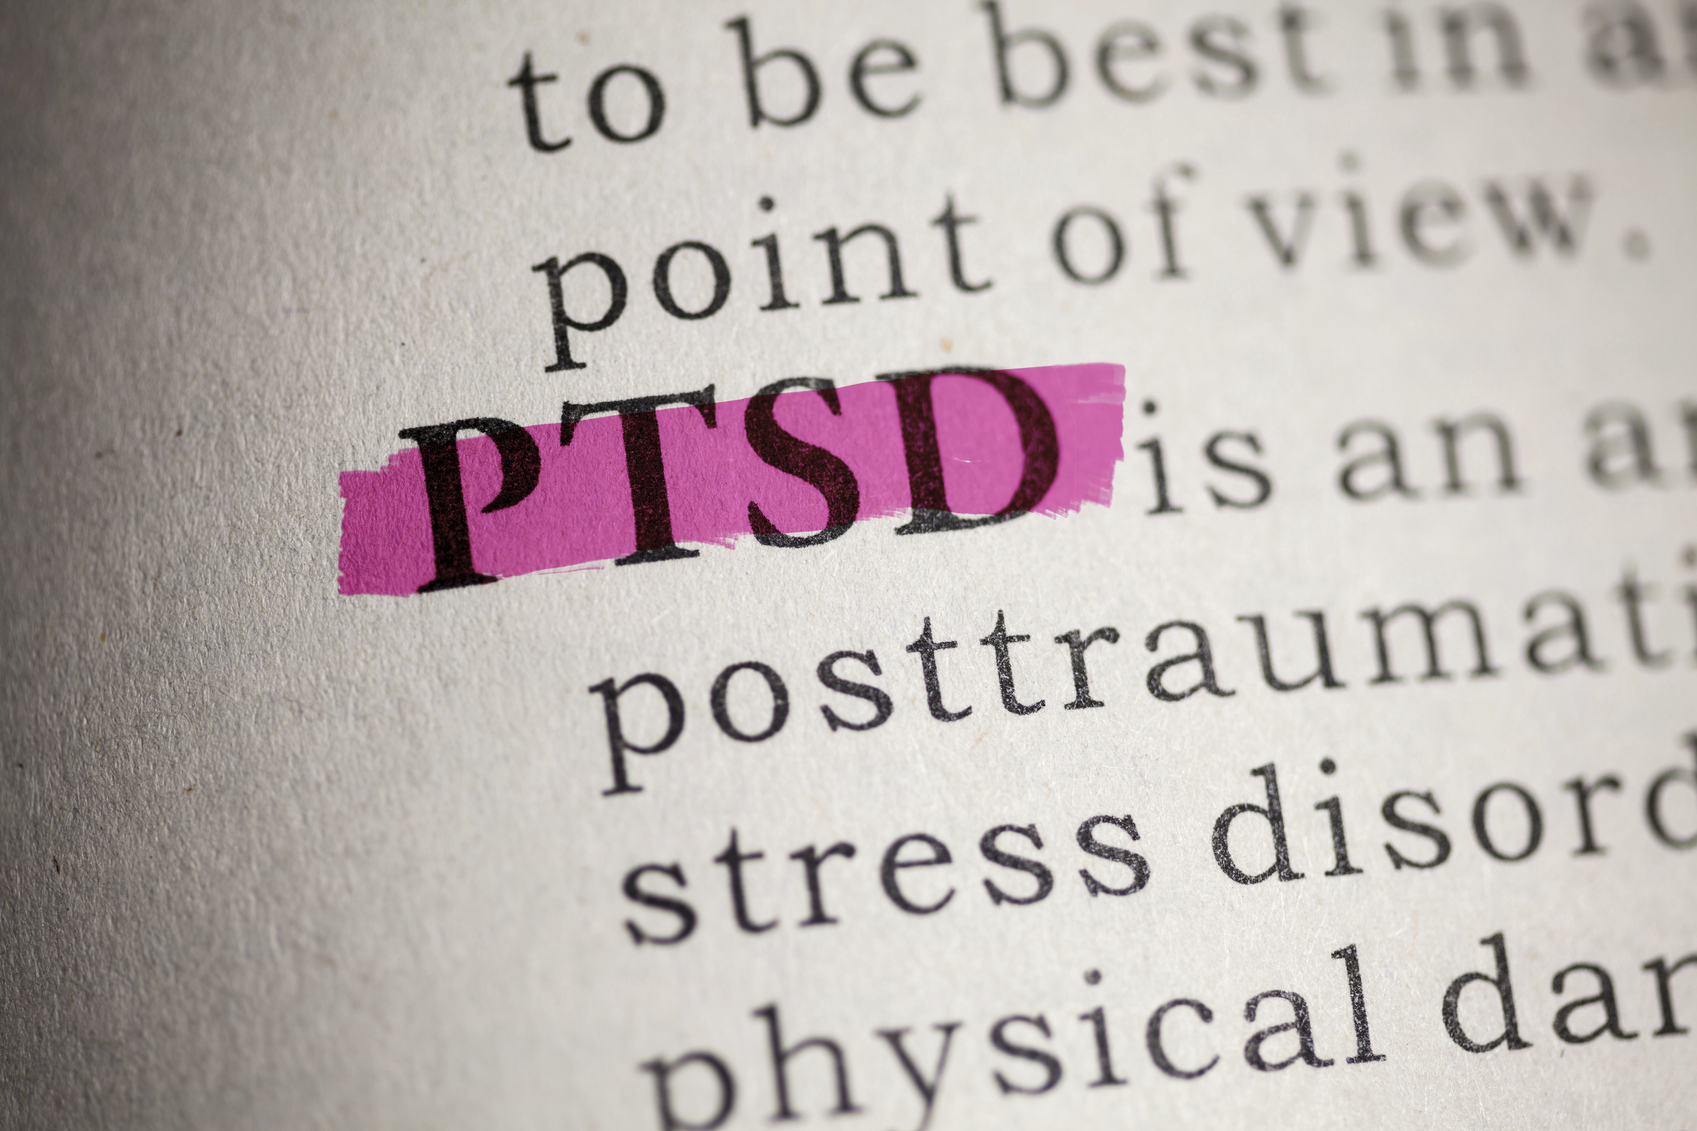 Means what is ptsd Does PTSD